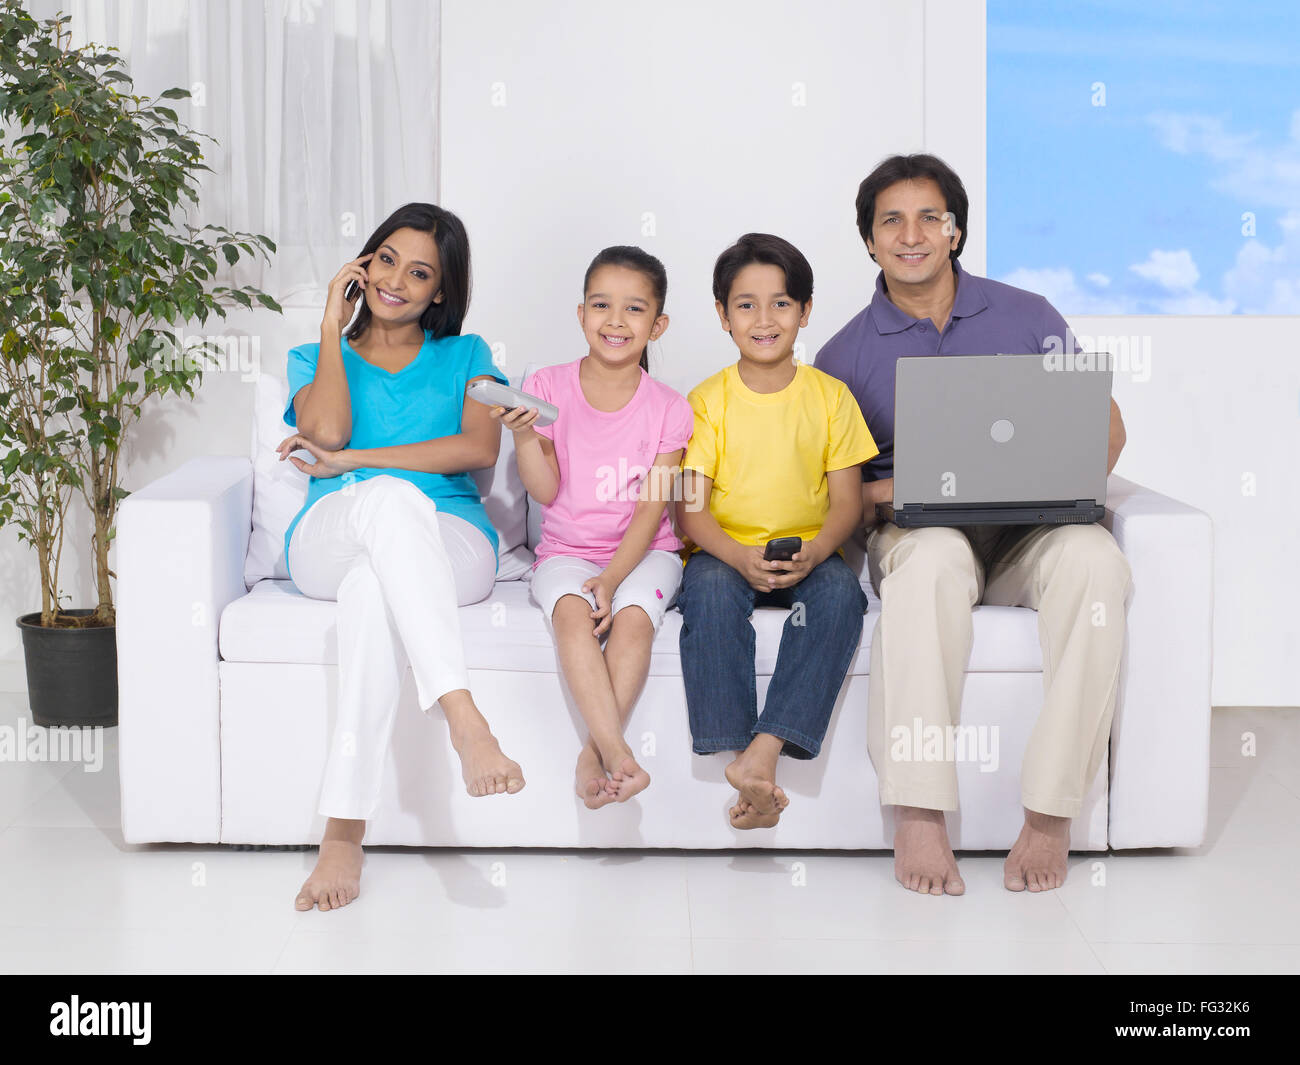 Woman and son using mobile while man using laptop and daughter with remote MR#779P ; MR#779Q ; MR#779R ; MR#779S Stock Photo